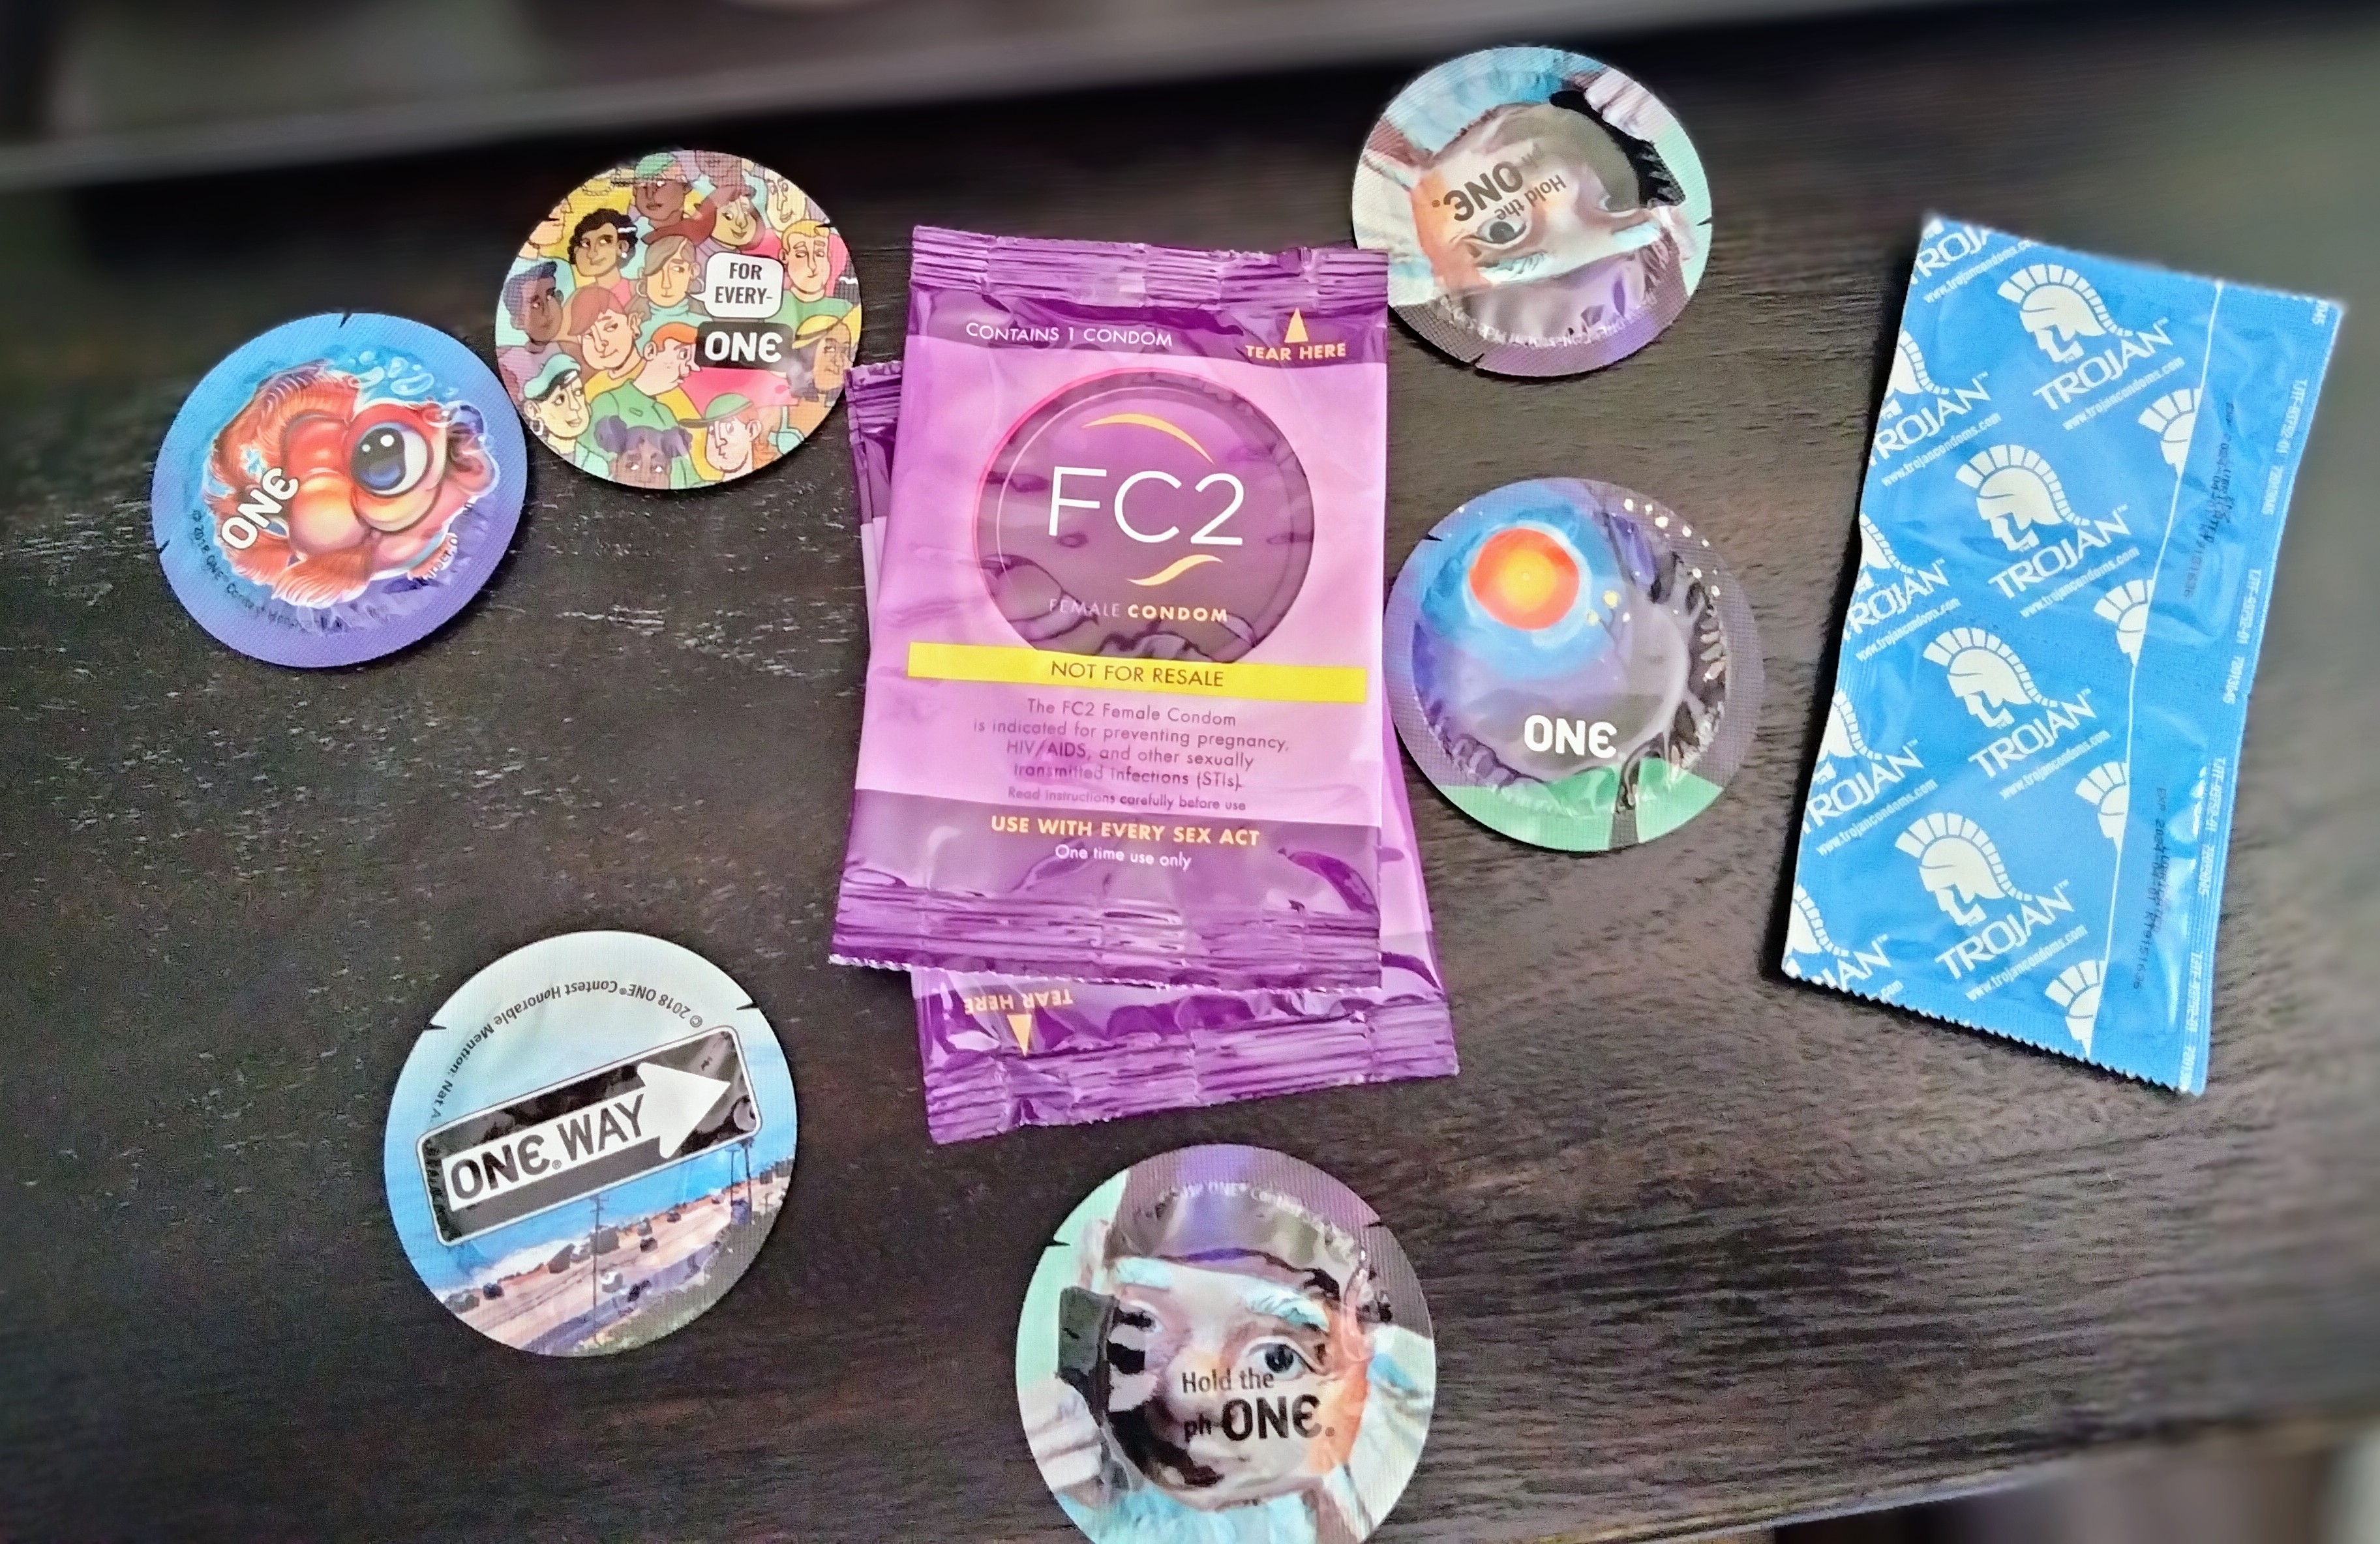 Free condoms for Plant City farmworkers A nonprofit responds to Roe overturn